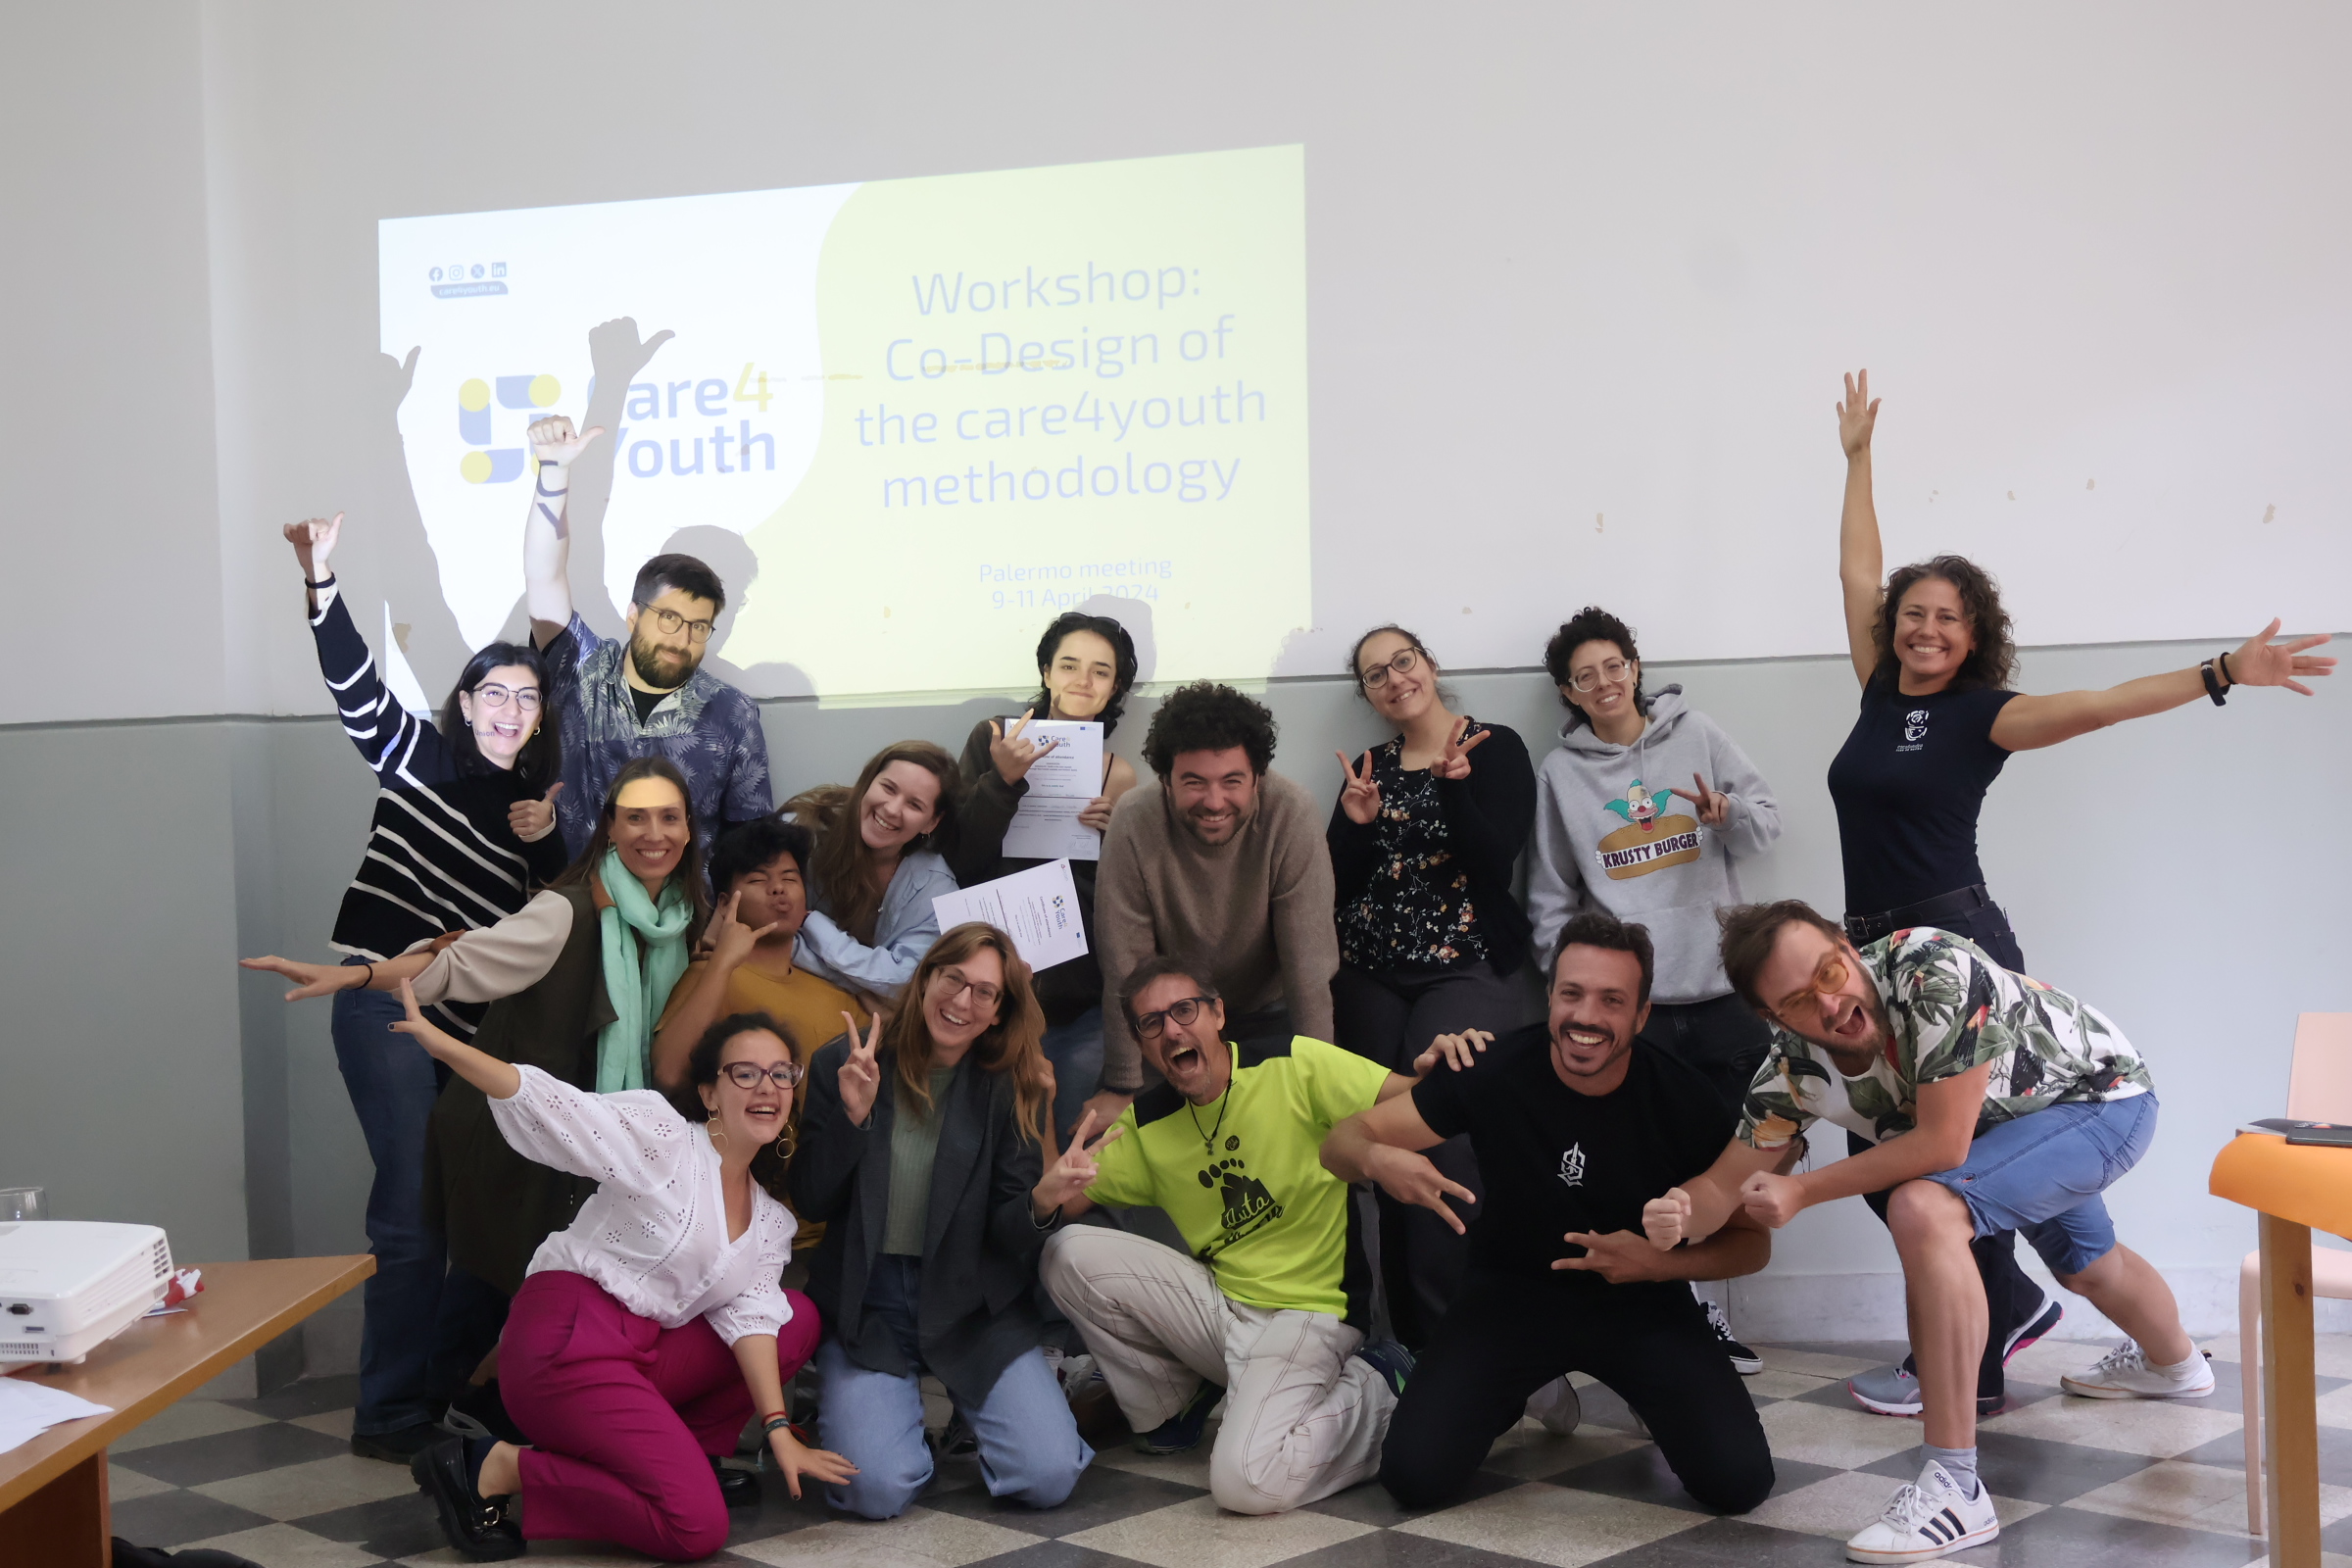 THE ERASMUS+ Care4youth project consortium gathered in Palermo to promote intercultural integration and youth development.